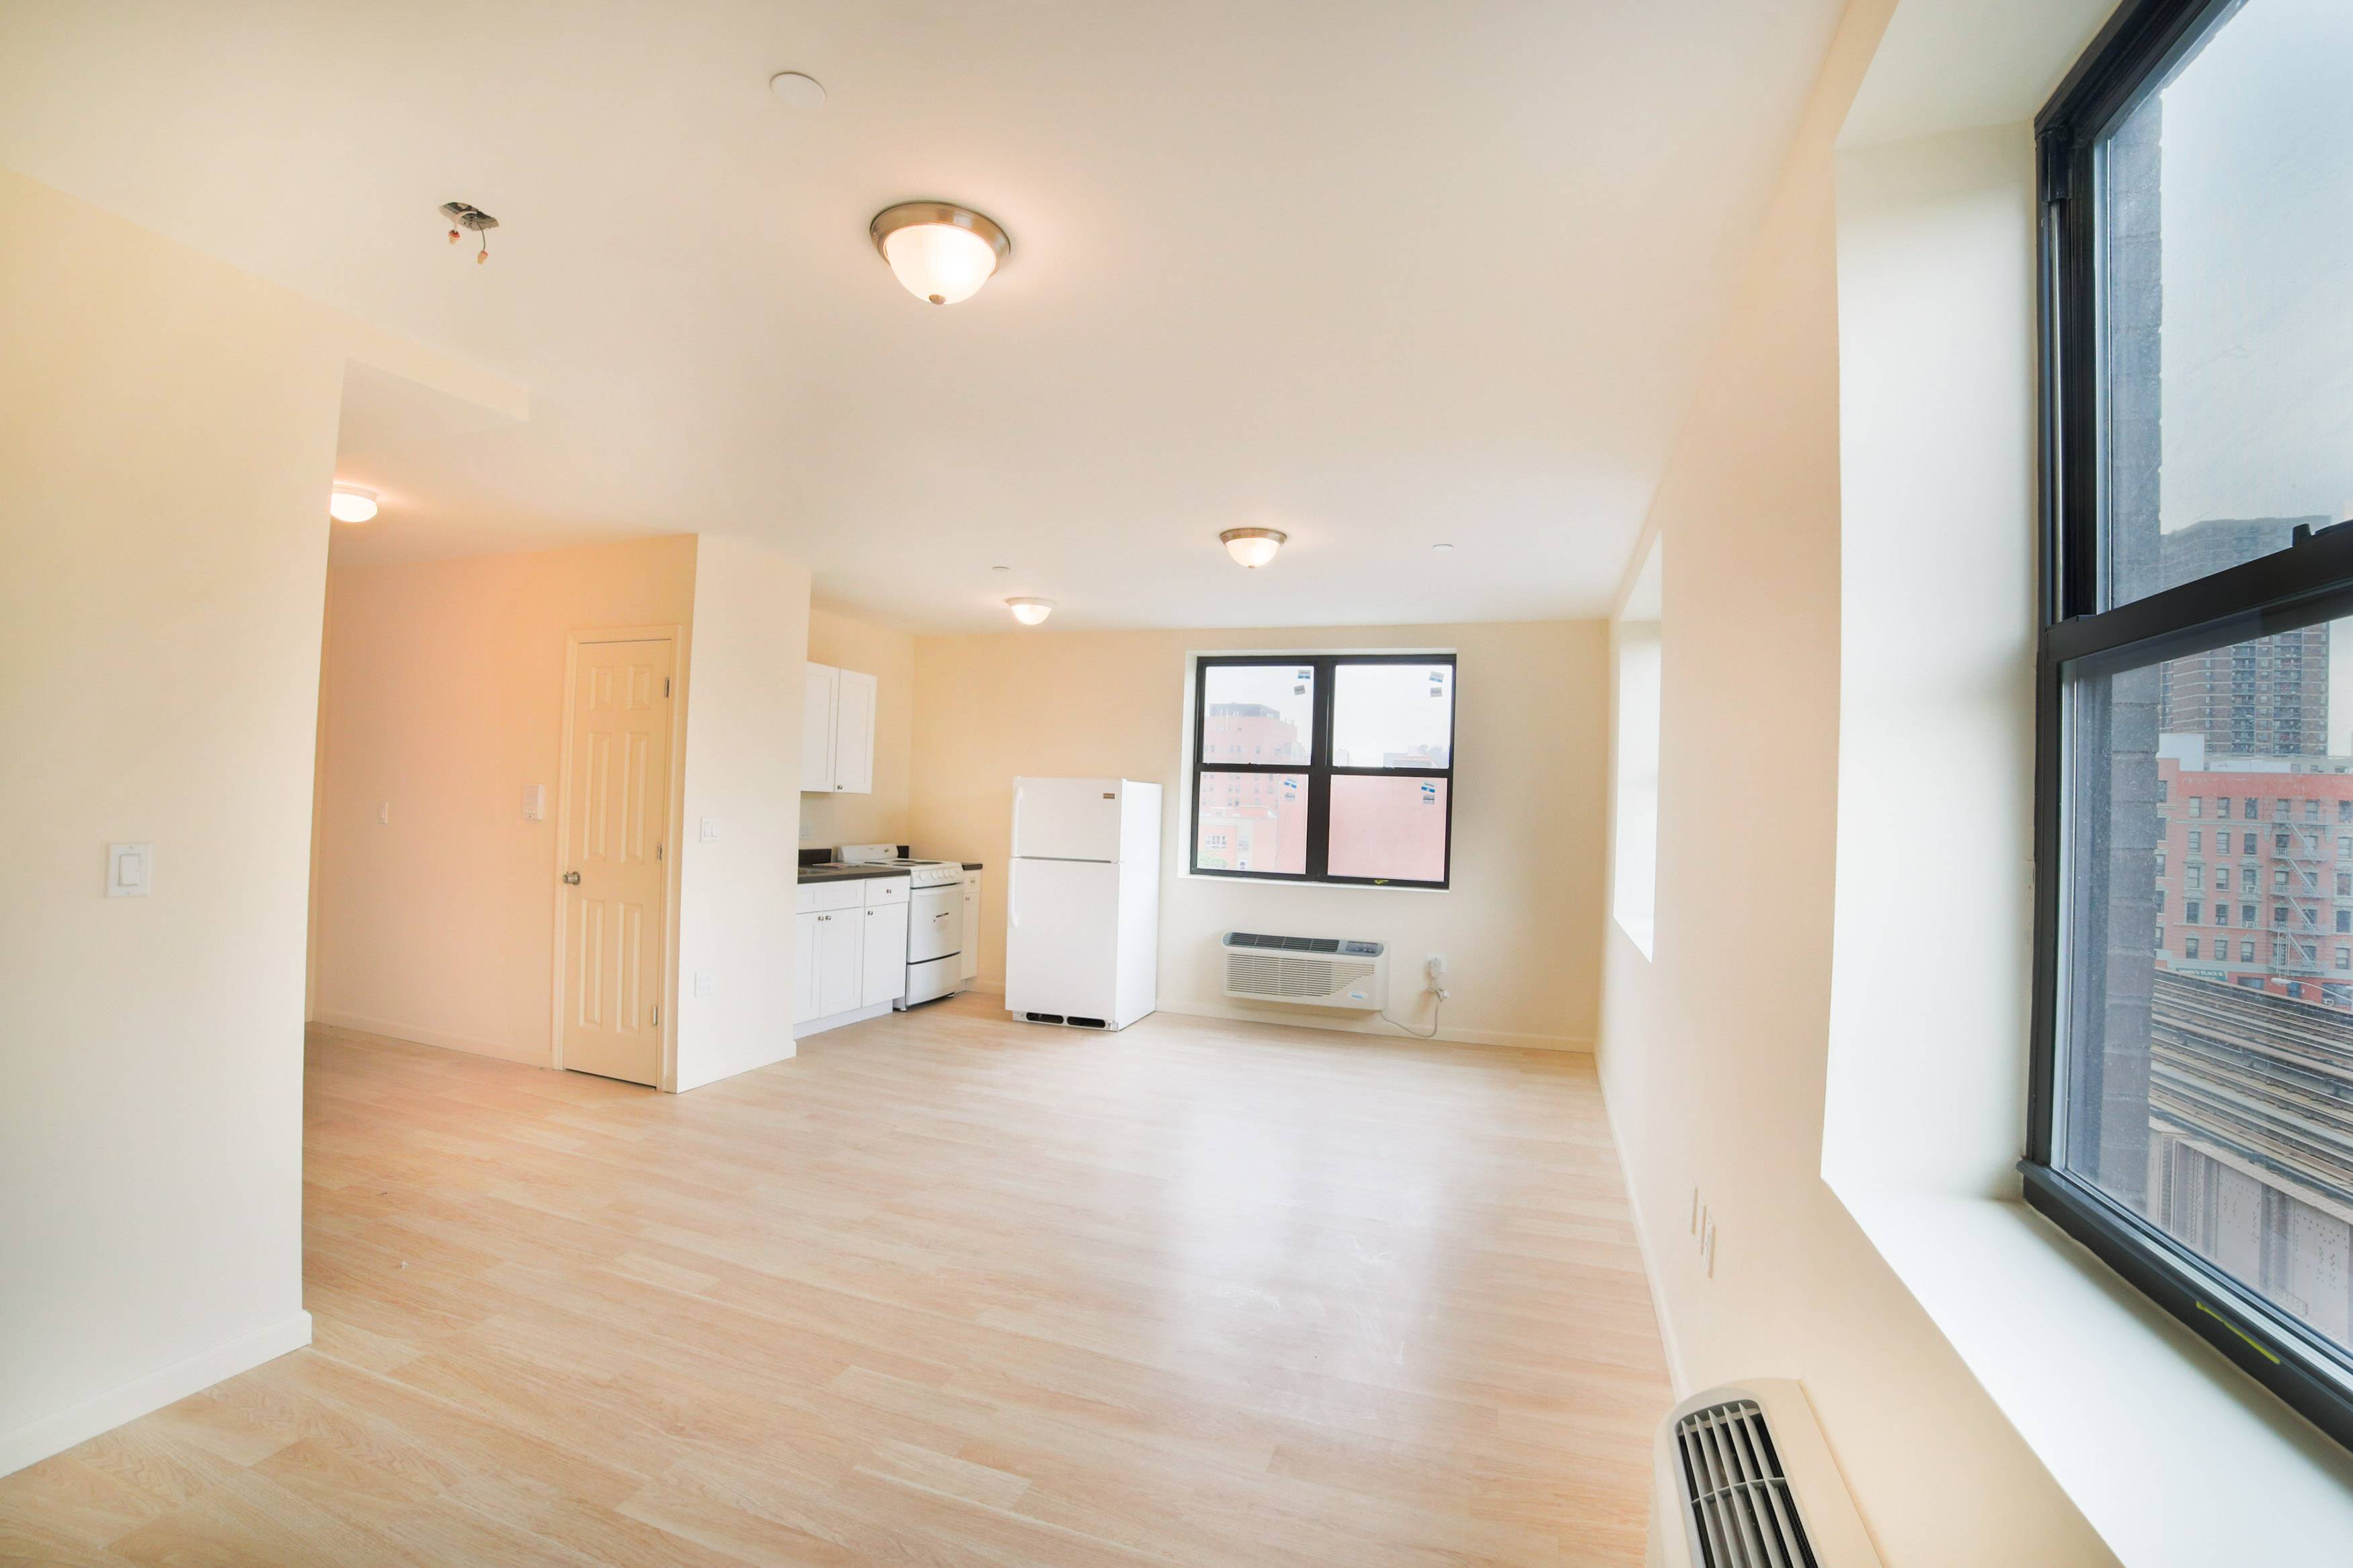 1674 Park Ave: NO FEE! New Development Alcove Studio Apartment for Rent in Harlem